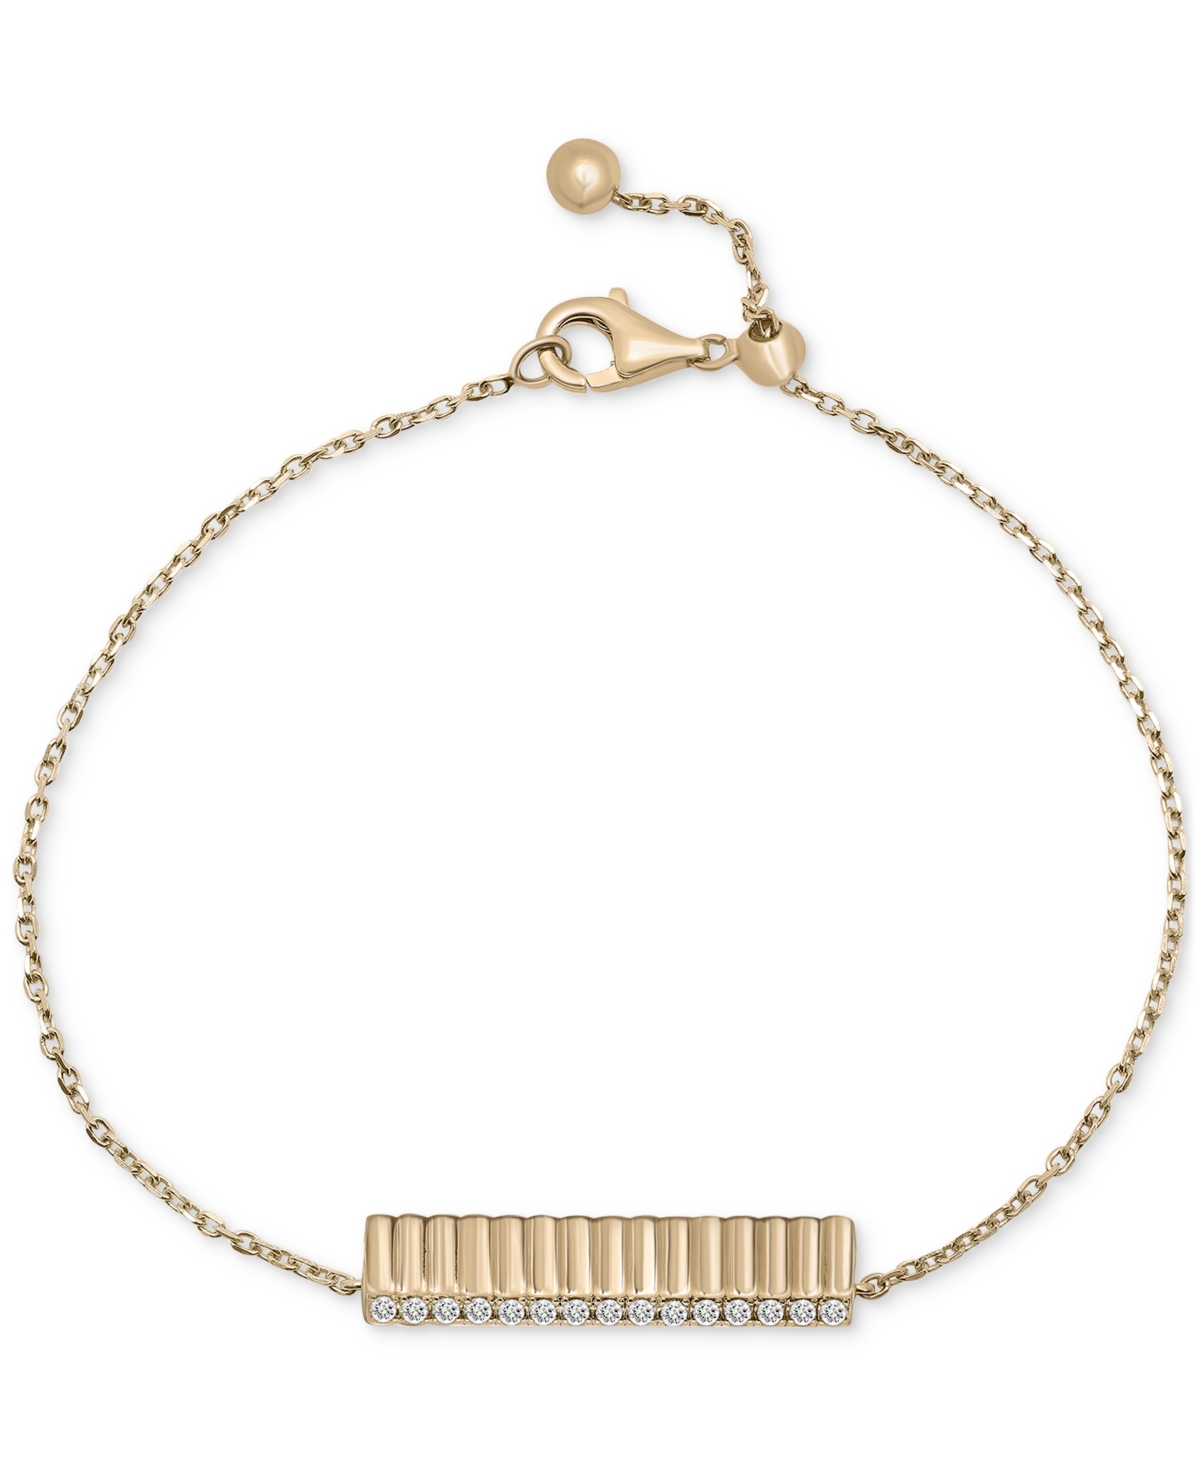 Diamond Wide Bar Link Bracelet (1/6 ct. t.w.) in Gold Vermeil, Created for Macy's - Gold Vermeil